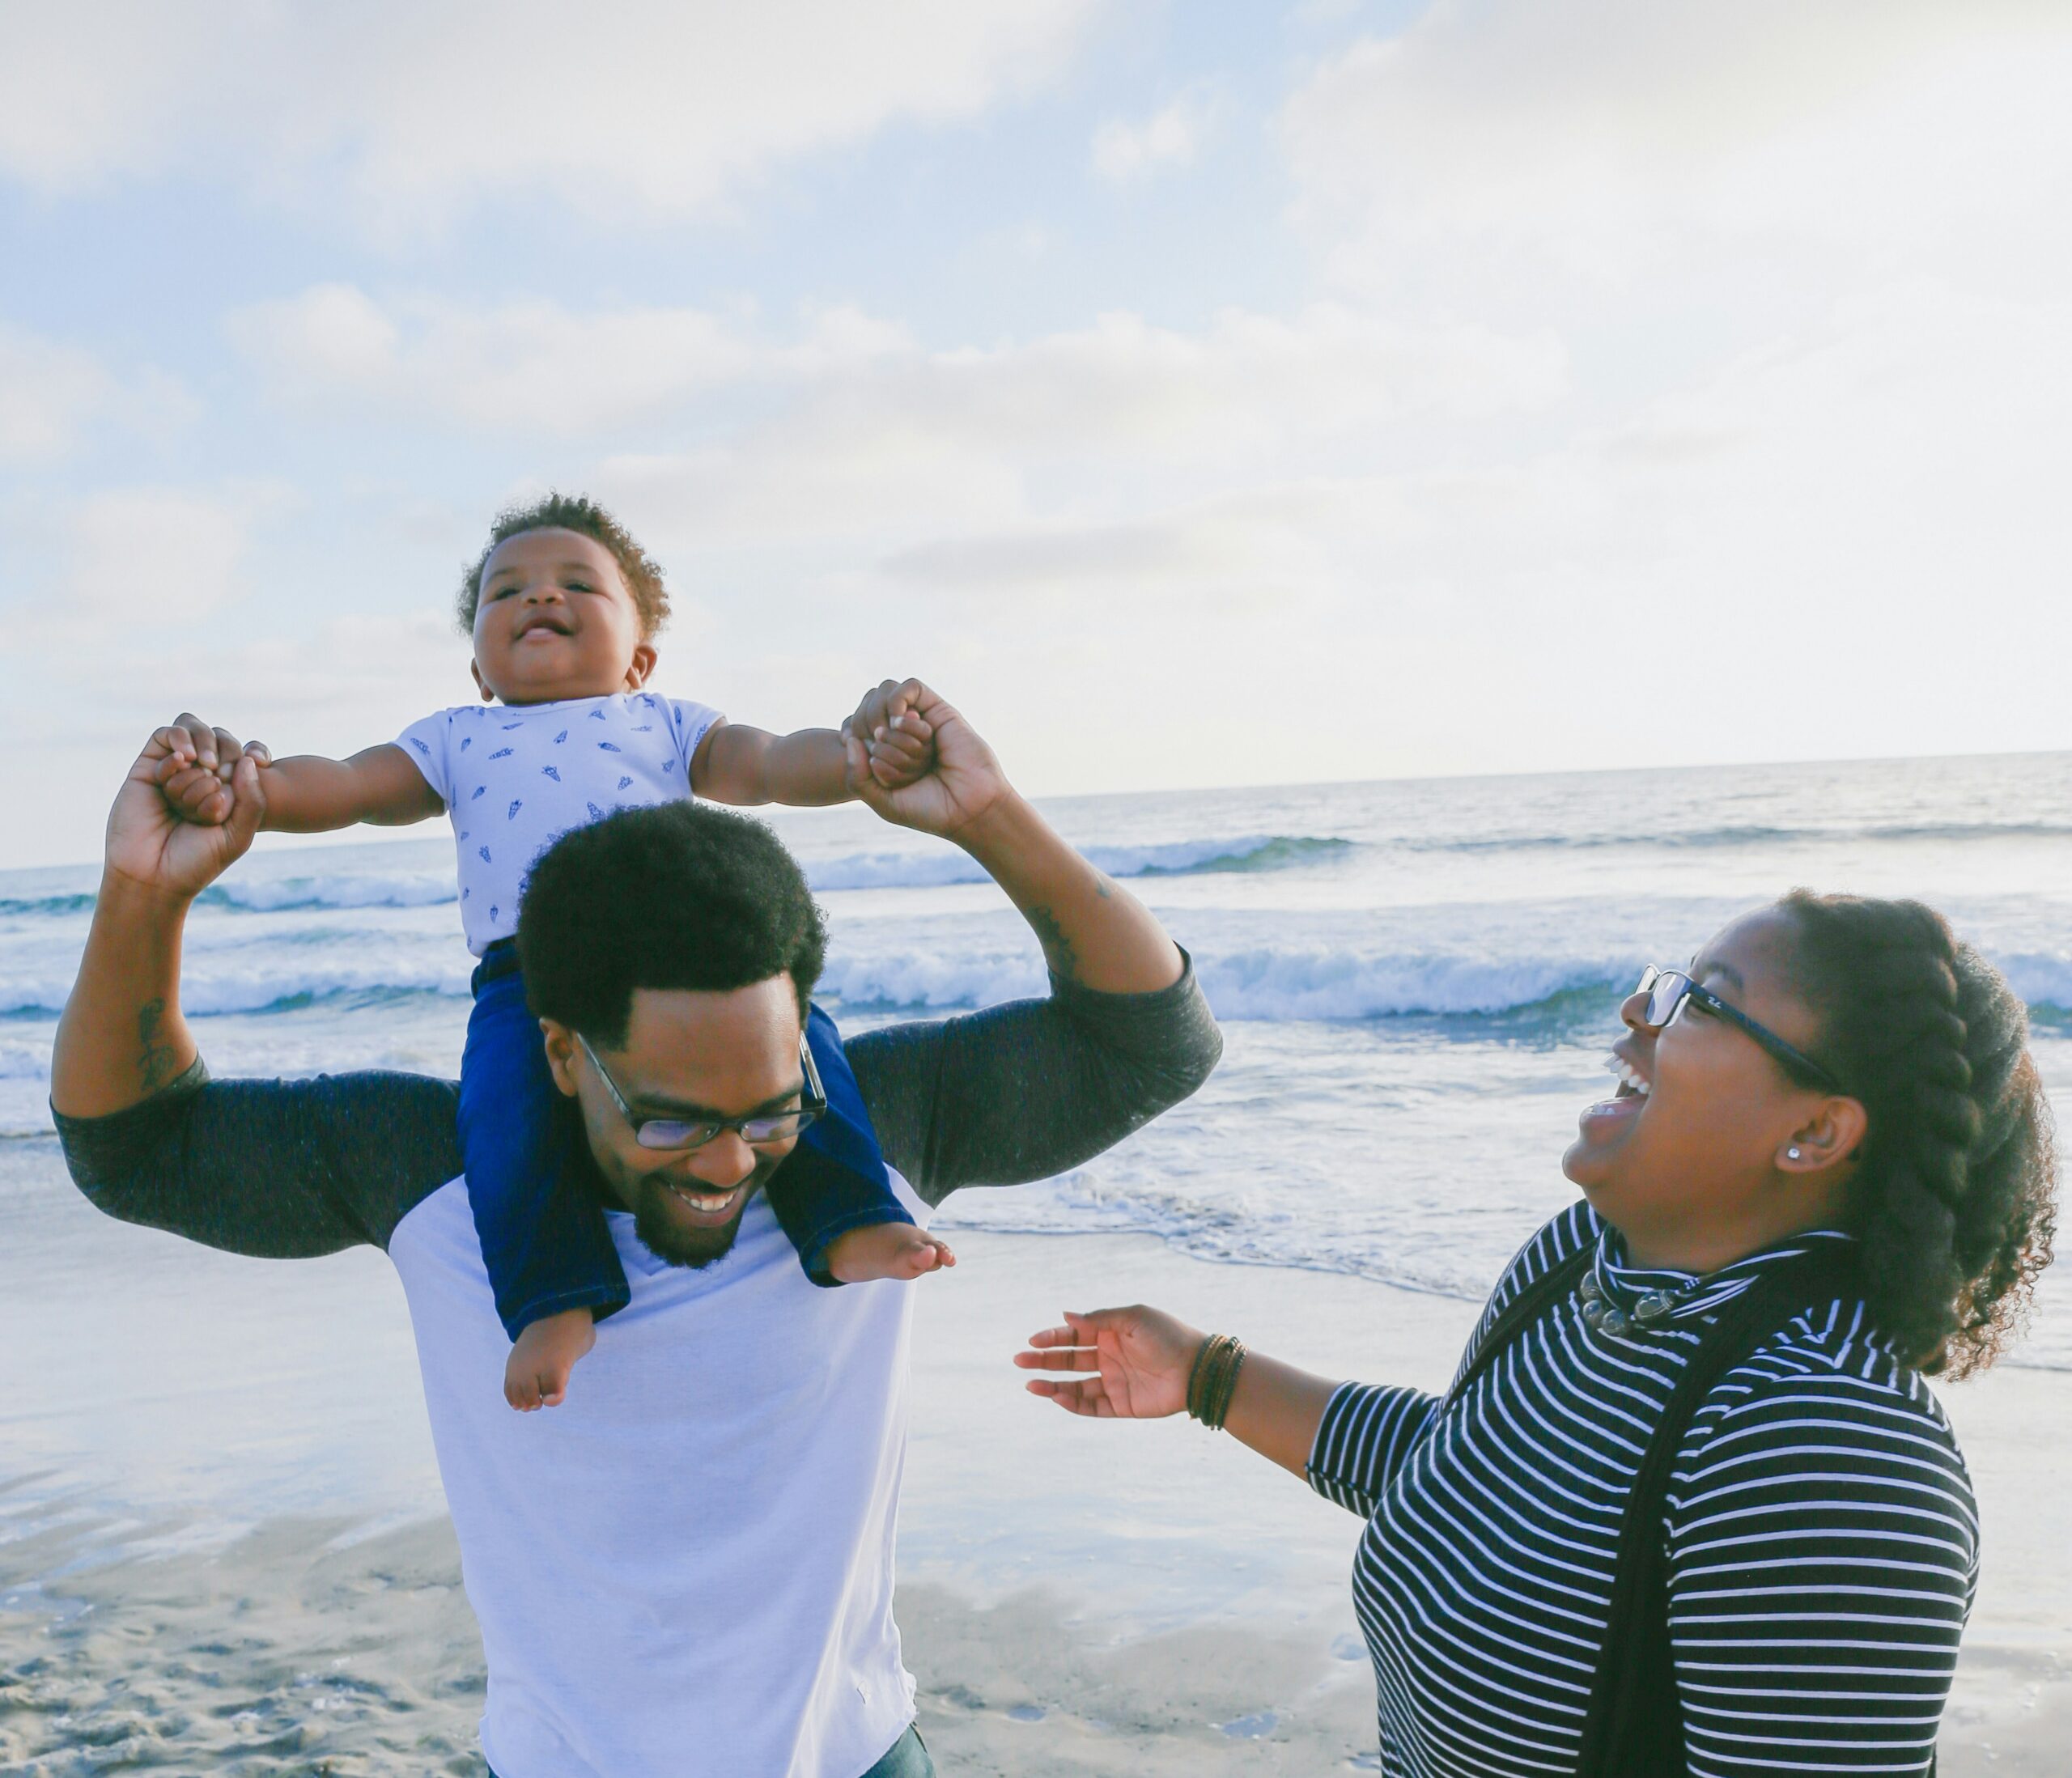 These Mexico beaches are the top options for travelers with families.
Pictured: a Black family laughing and enjoying a Mexican beach